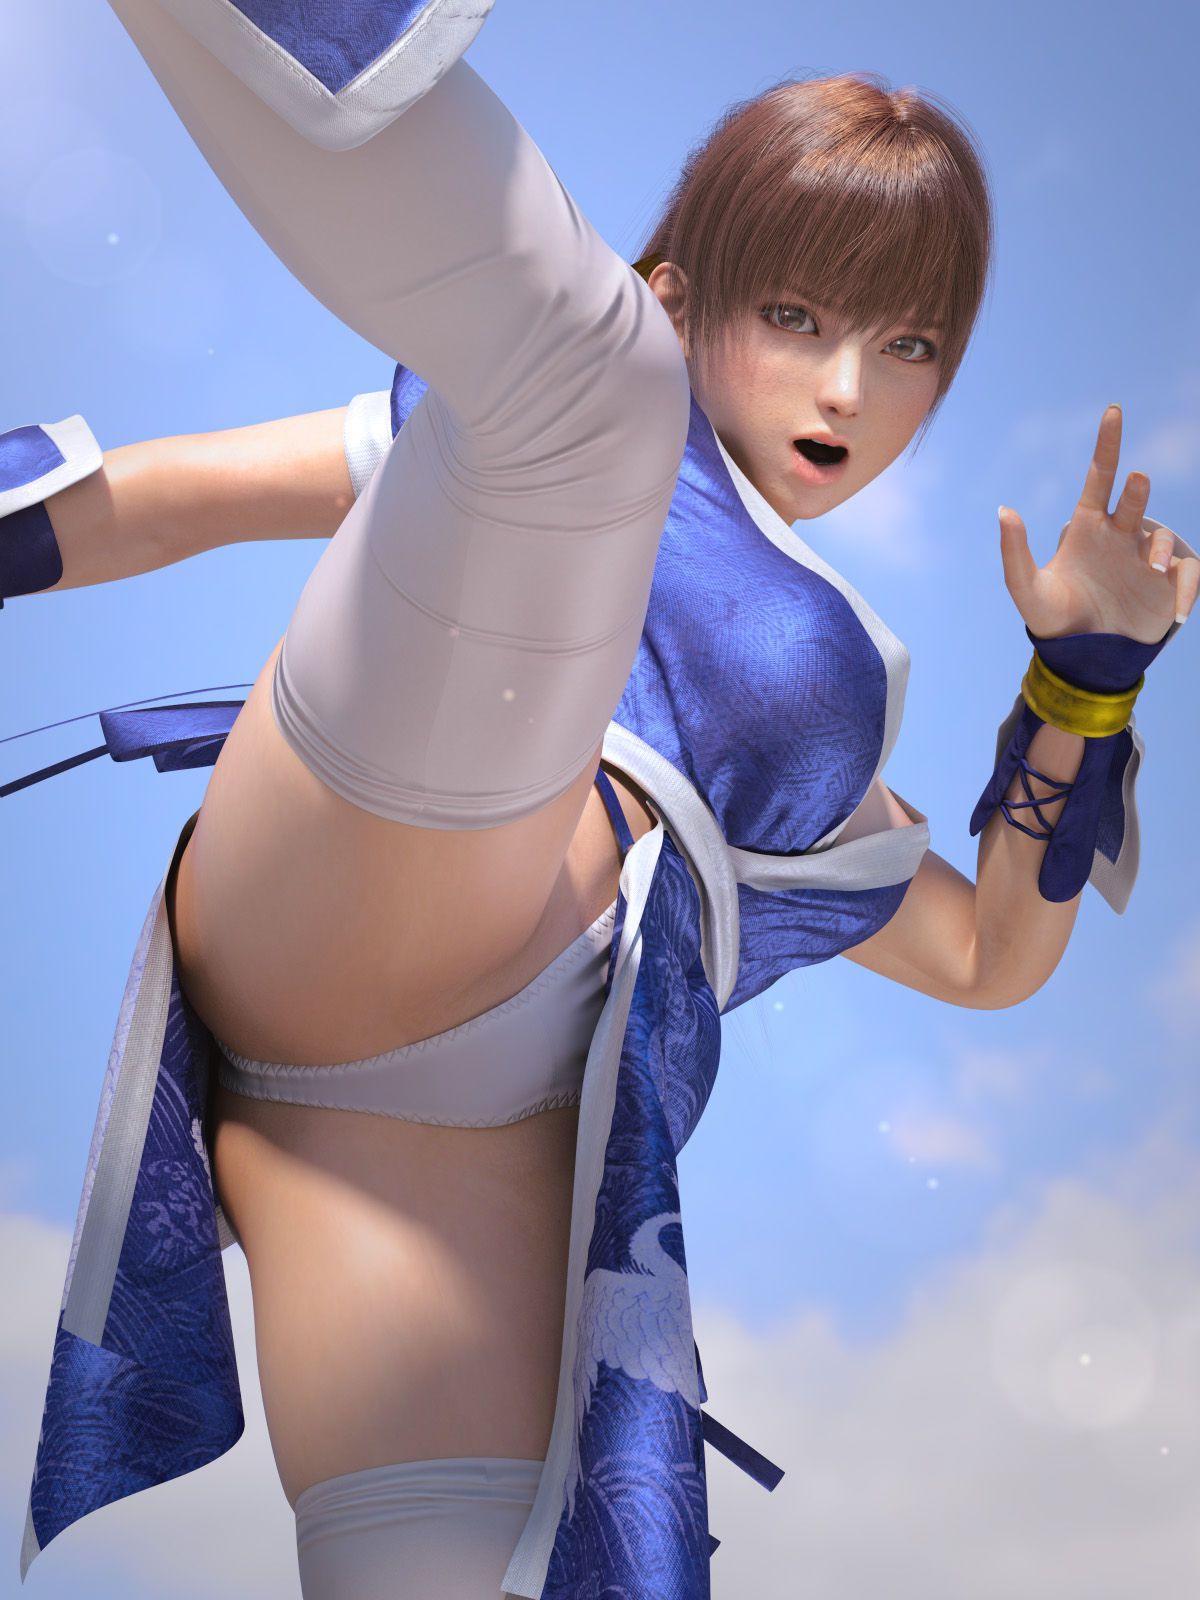 [DEAD OR ALIVE] 3D CG erotic images of DOA heroines Part 5 5